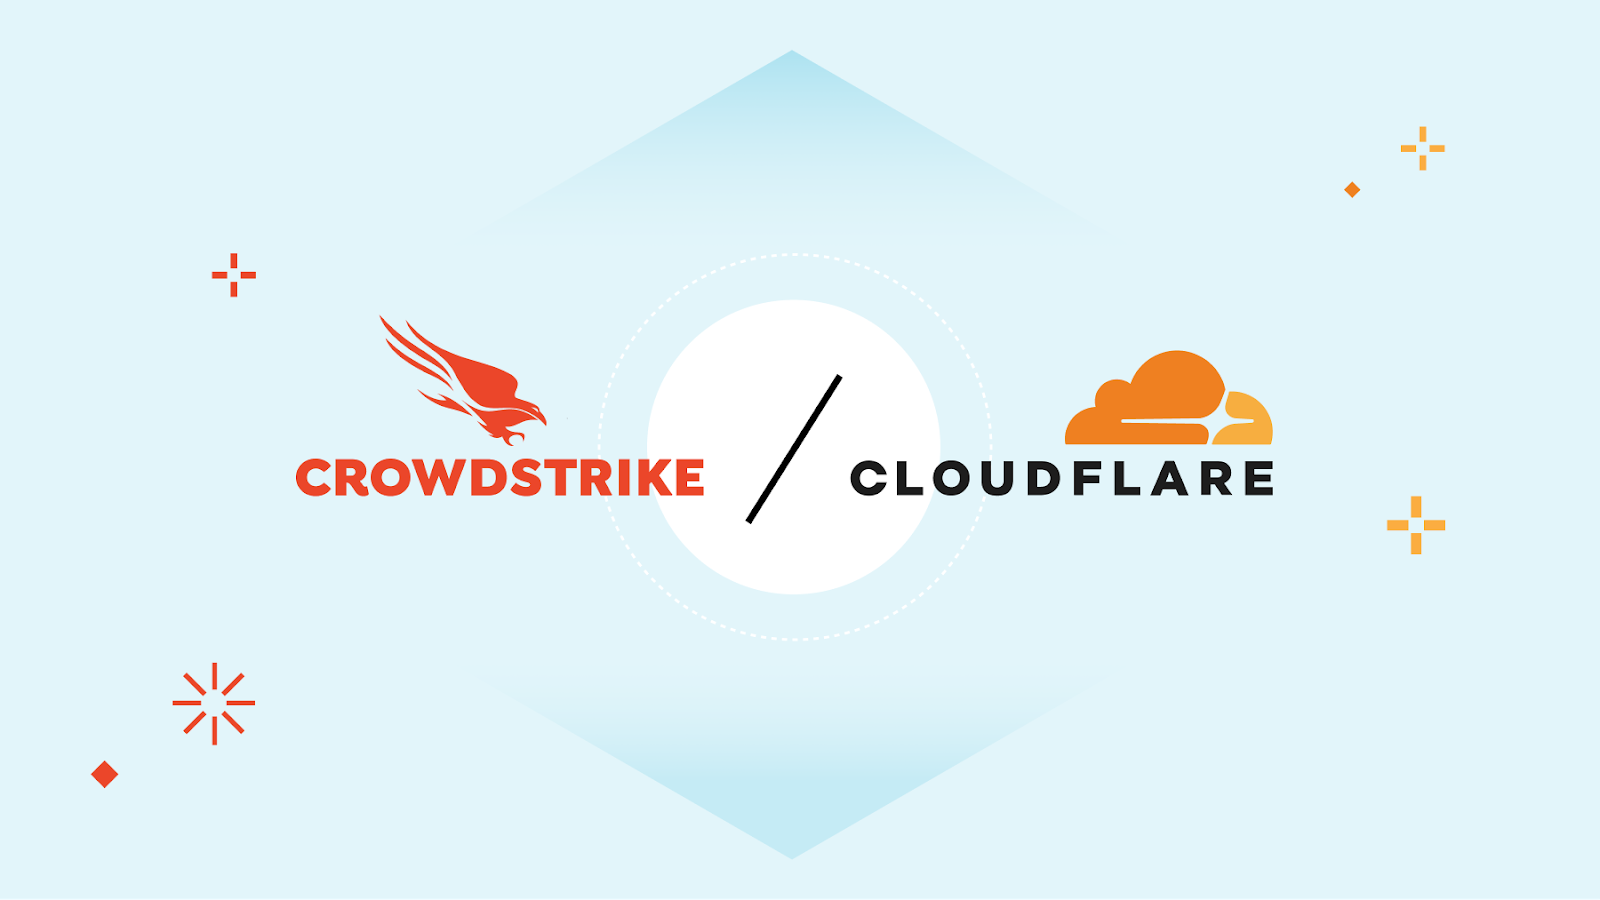 Cloudflare and CrowdStrike partner to give CISOs secure control across devices, applications, and corporate networks